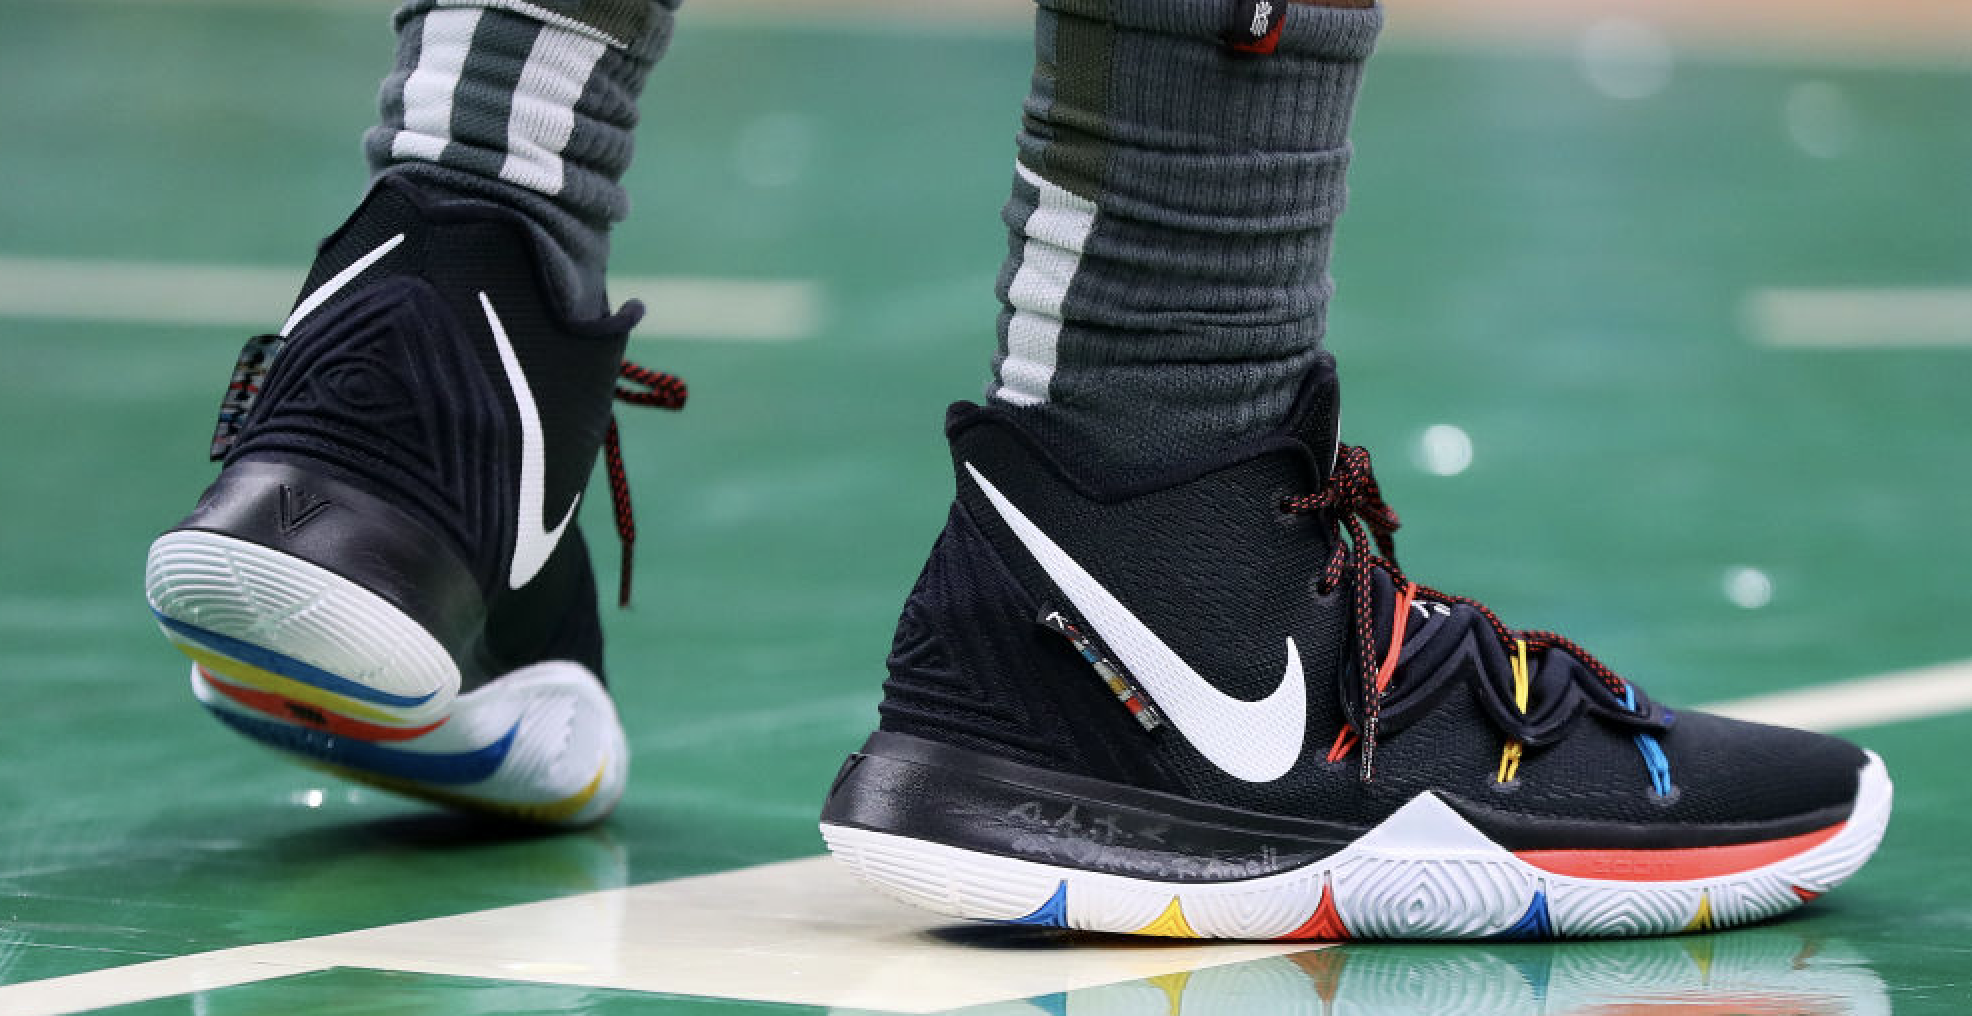 Kyrie Irving's "Friends" shoes. (Maddie Meyer/Getty)